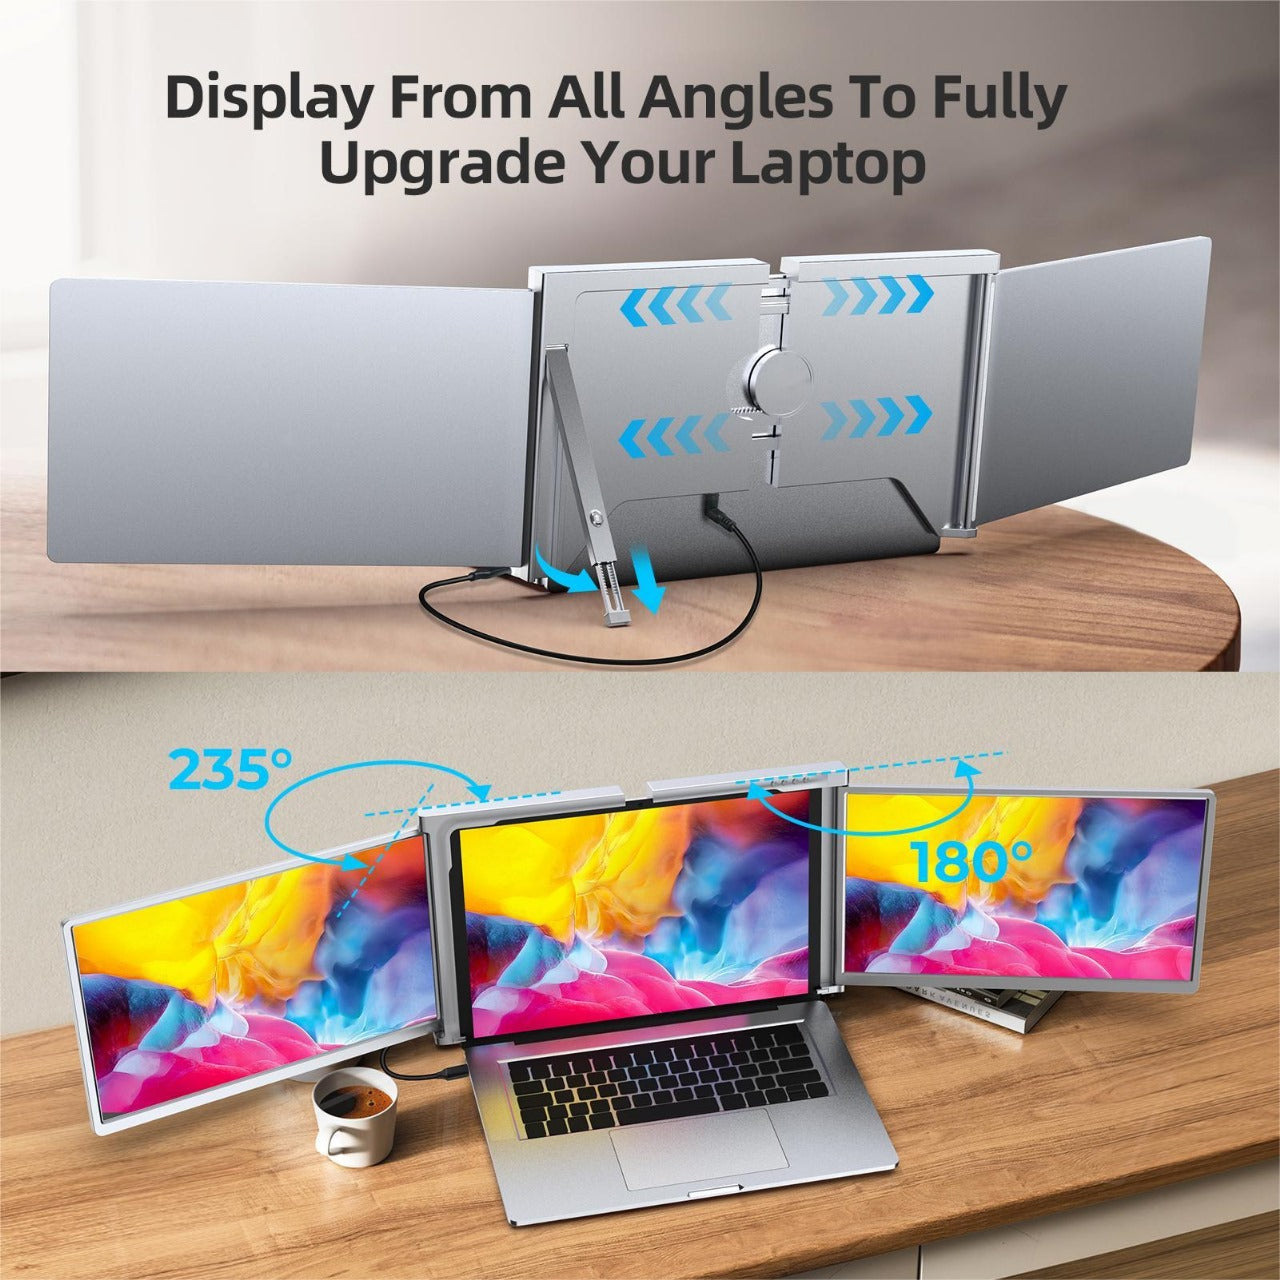 15 inch Trifold Portable Monitor 1080P IPS FHD Laptop Screen Extender For Laptop - Space Grey